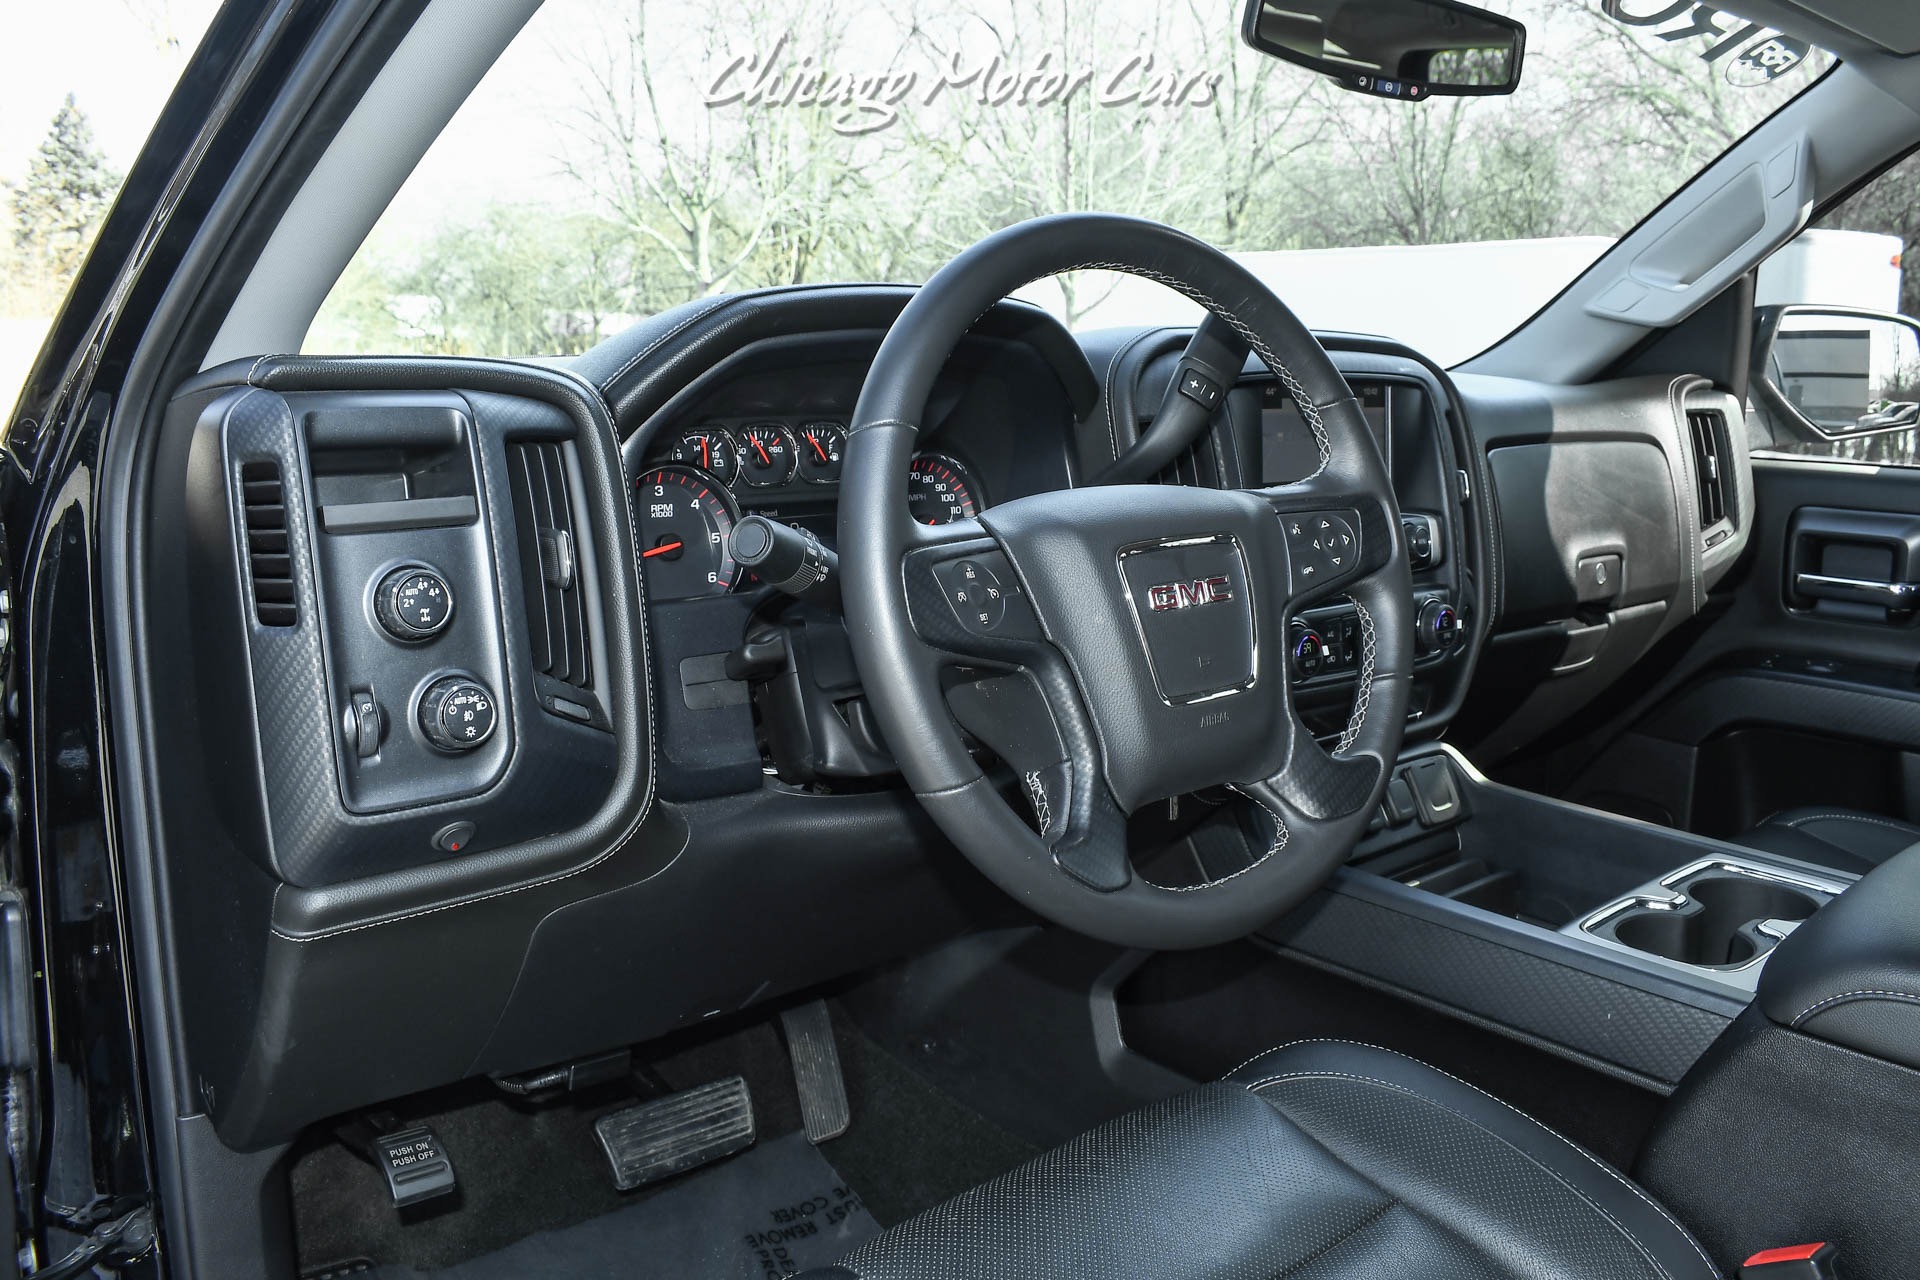 Used 2016 GMC Sierra 1500 SLE 4WD Crew Cab Pickup Rocky Ridge! $17k+ in  UPGRADES! Highly Equipped! For Sale (Special Pricing) | Chicago Motor Cars  Stock #18931B